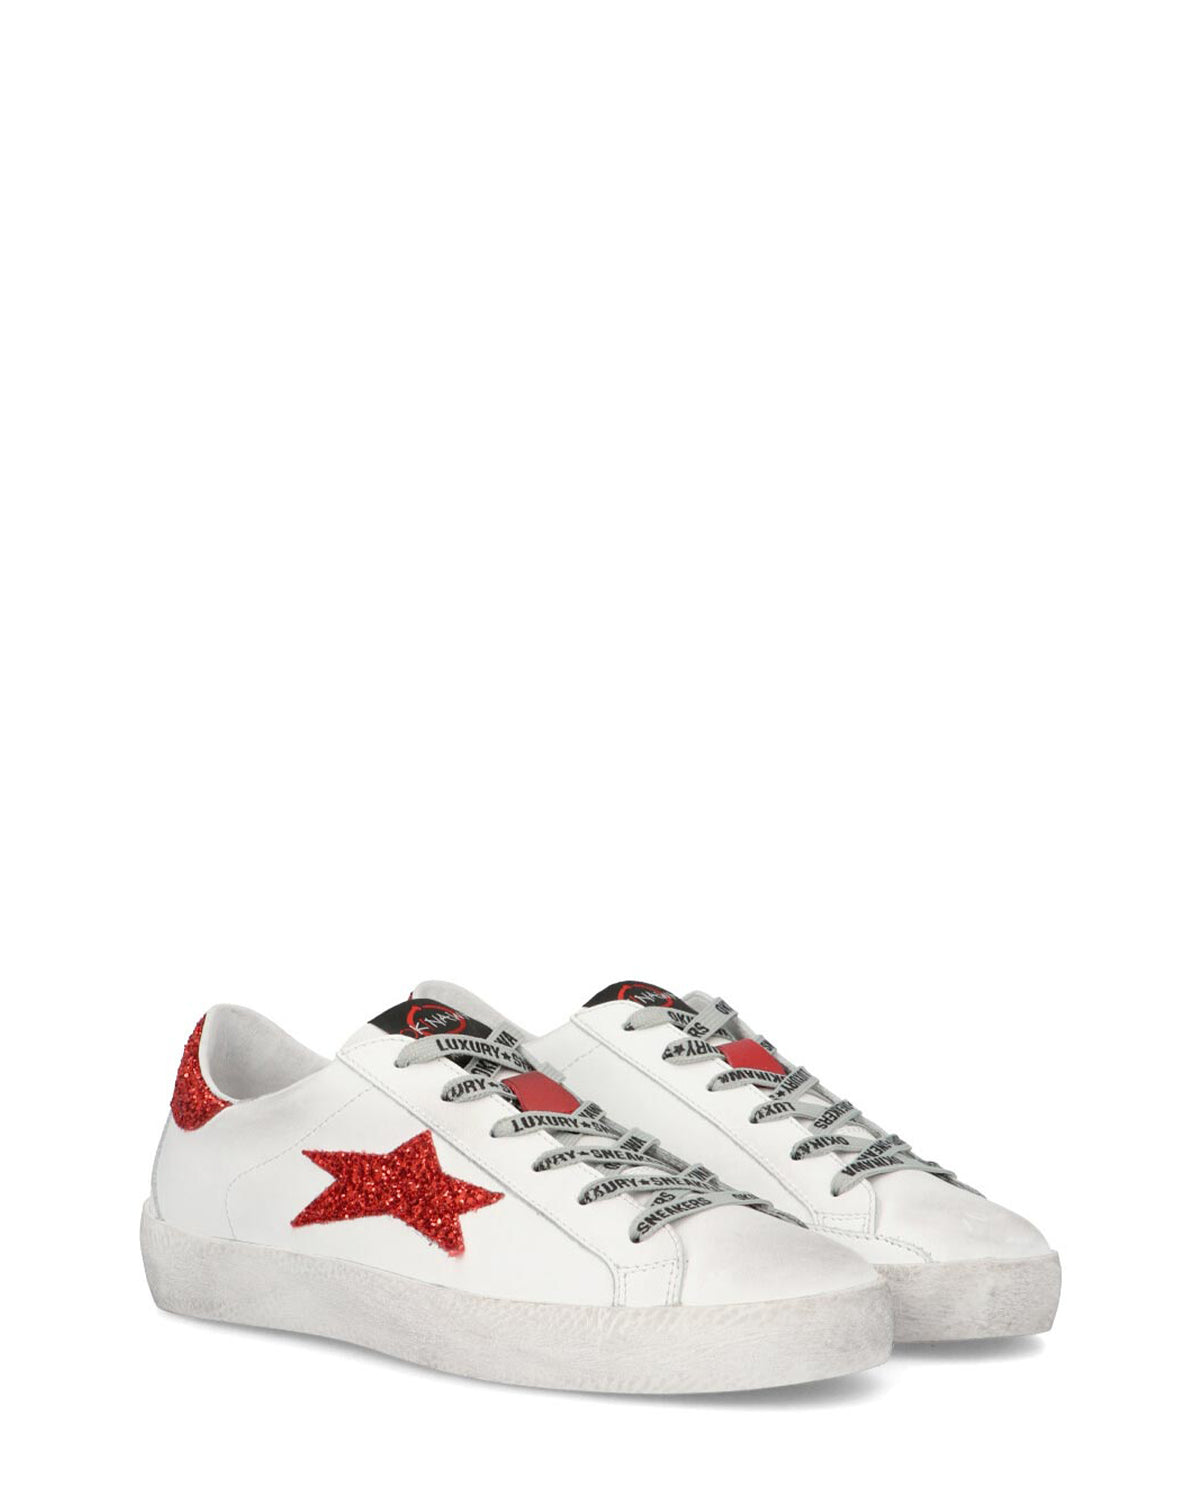 Low Limited Scarpe Sneakers Donna In Pelle con Glitter Made in Italy Fatte a Mano